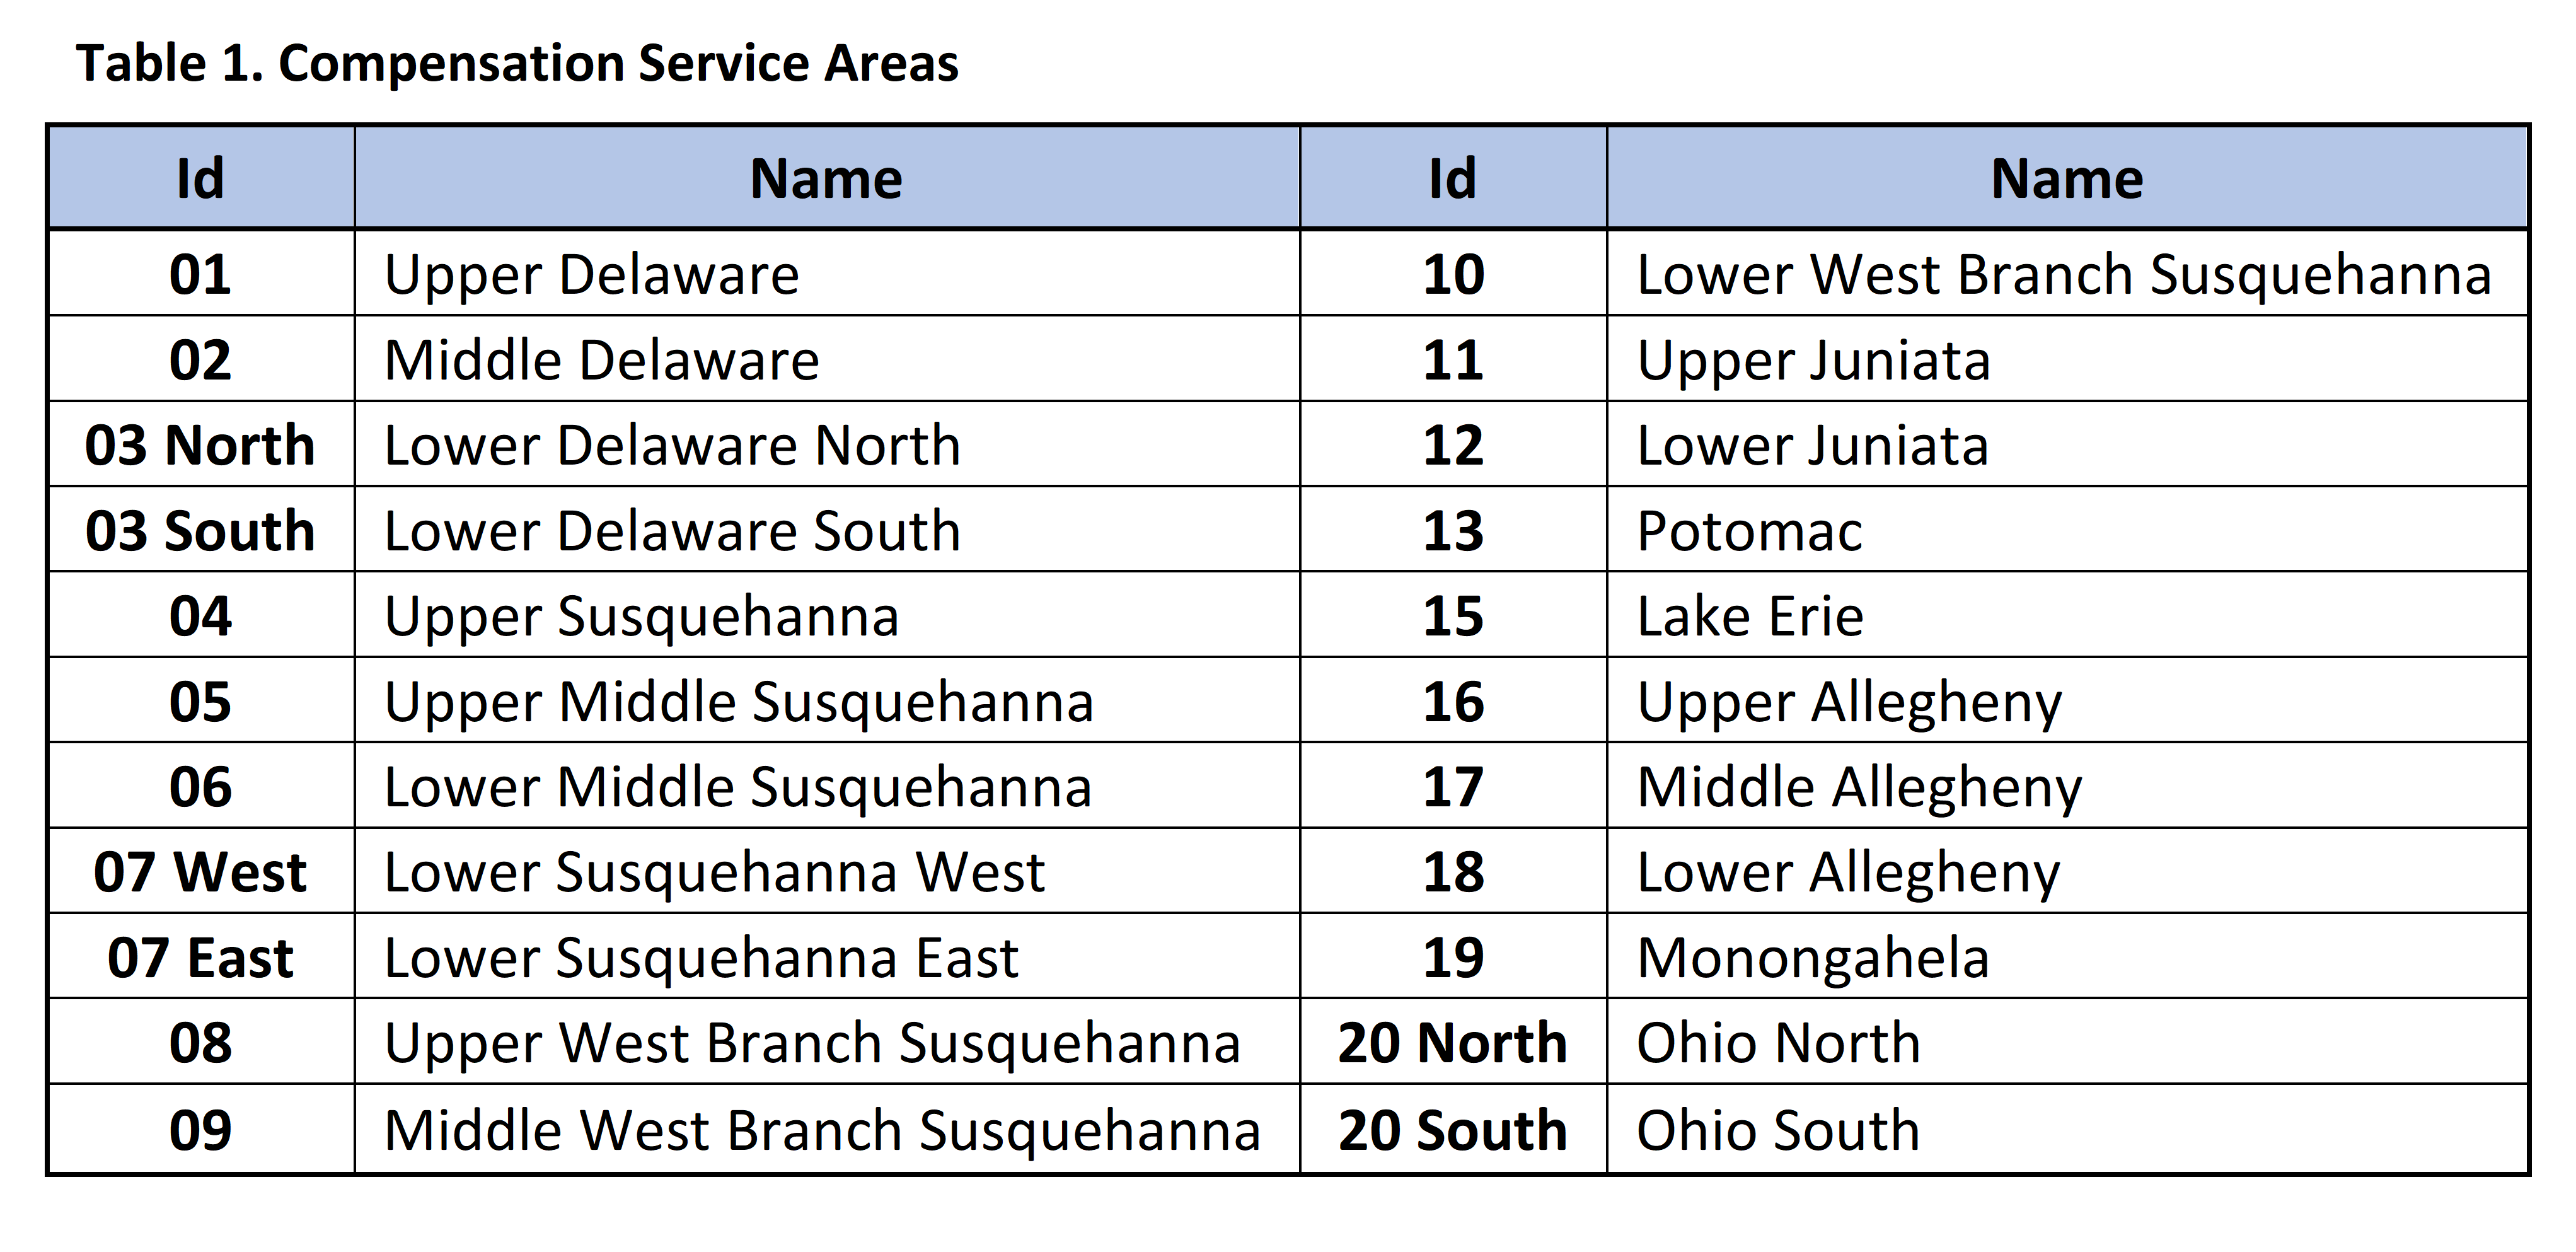 Compensation Service Areas Table